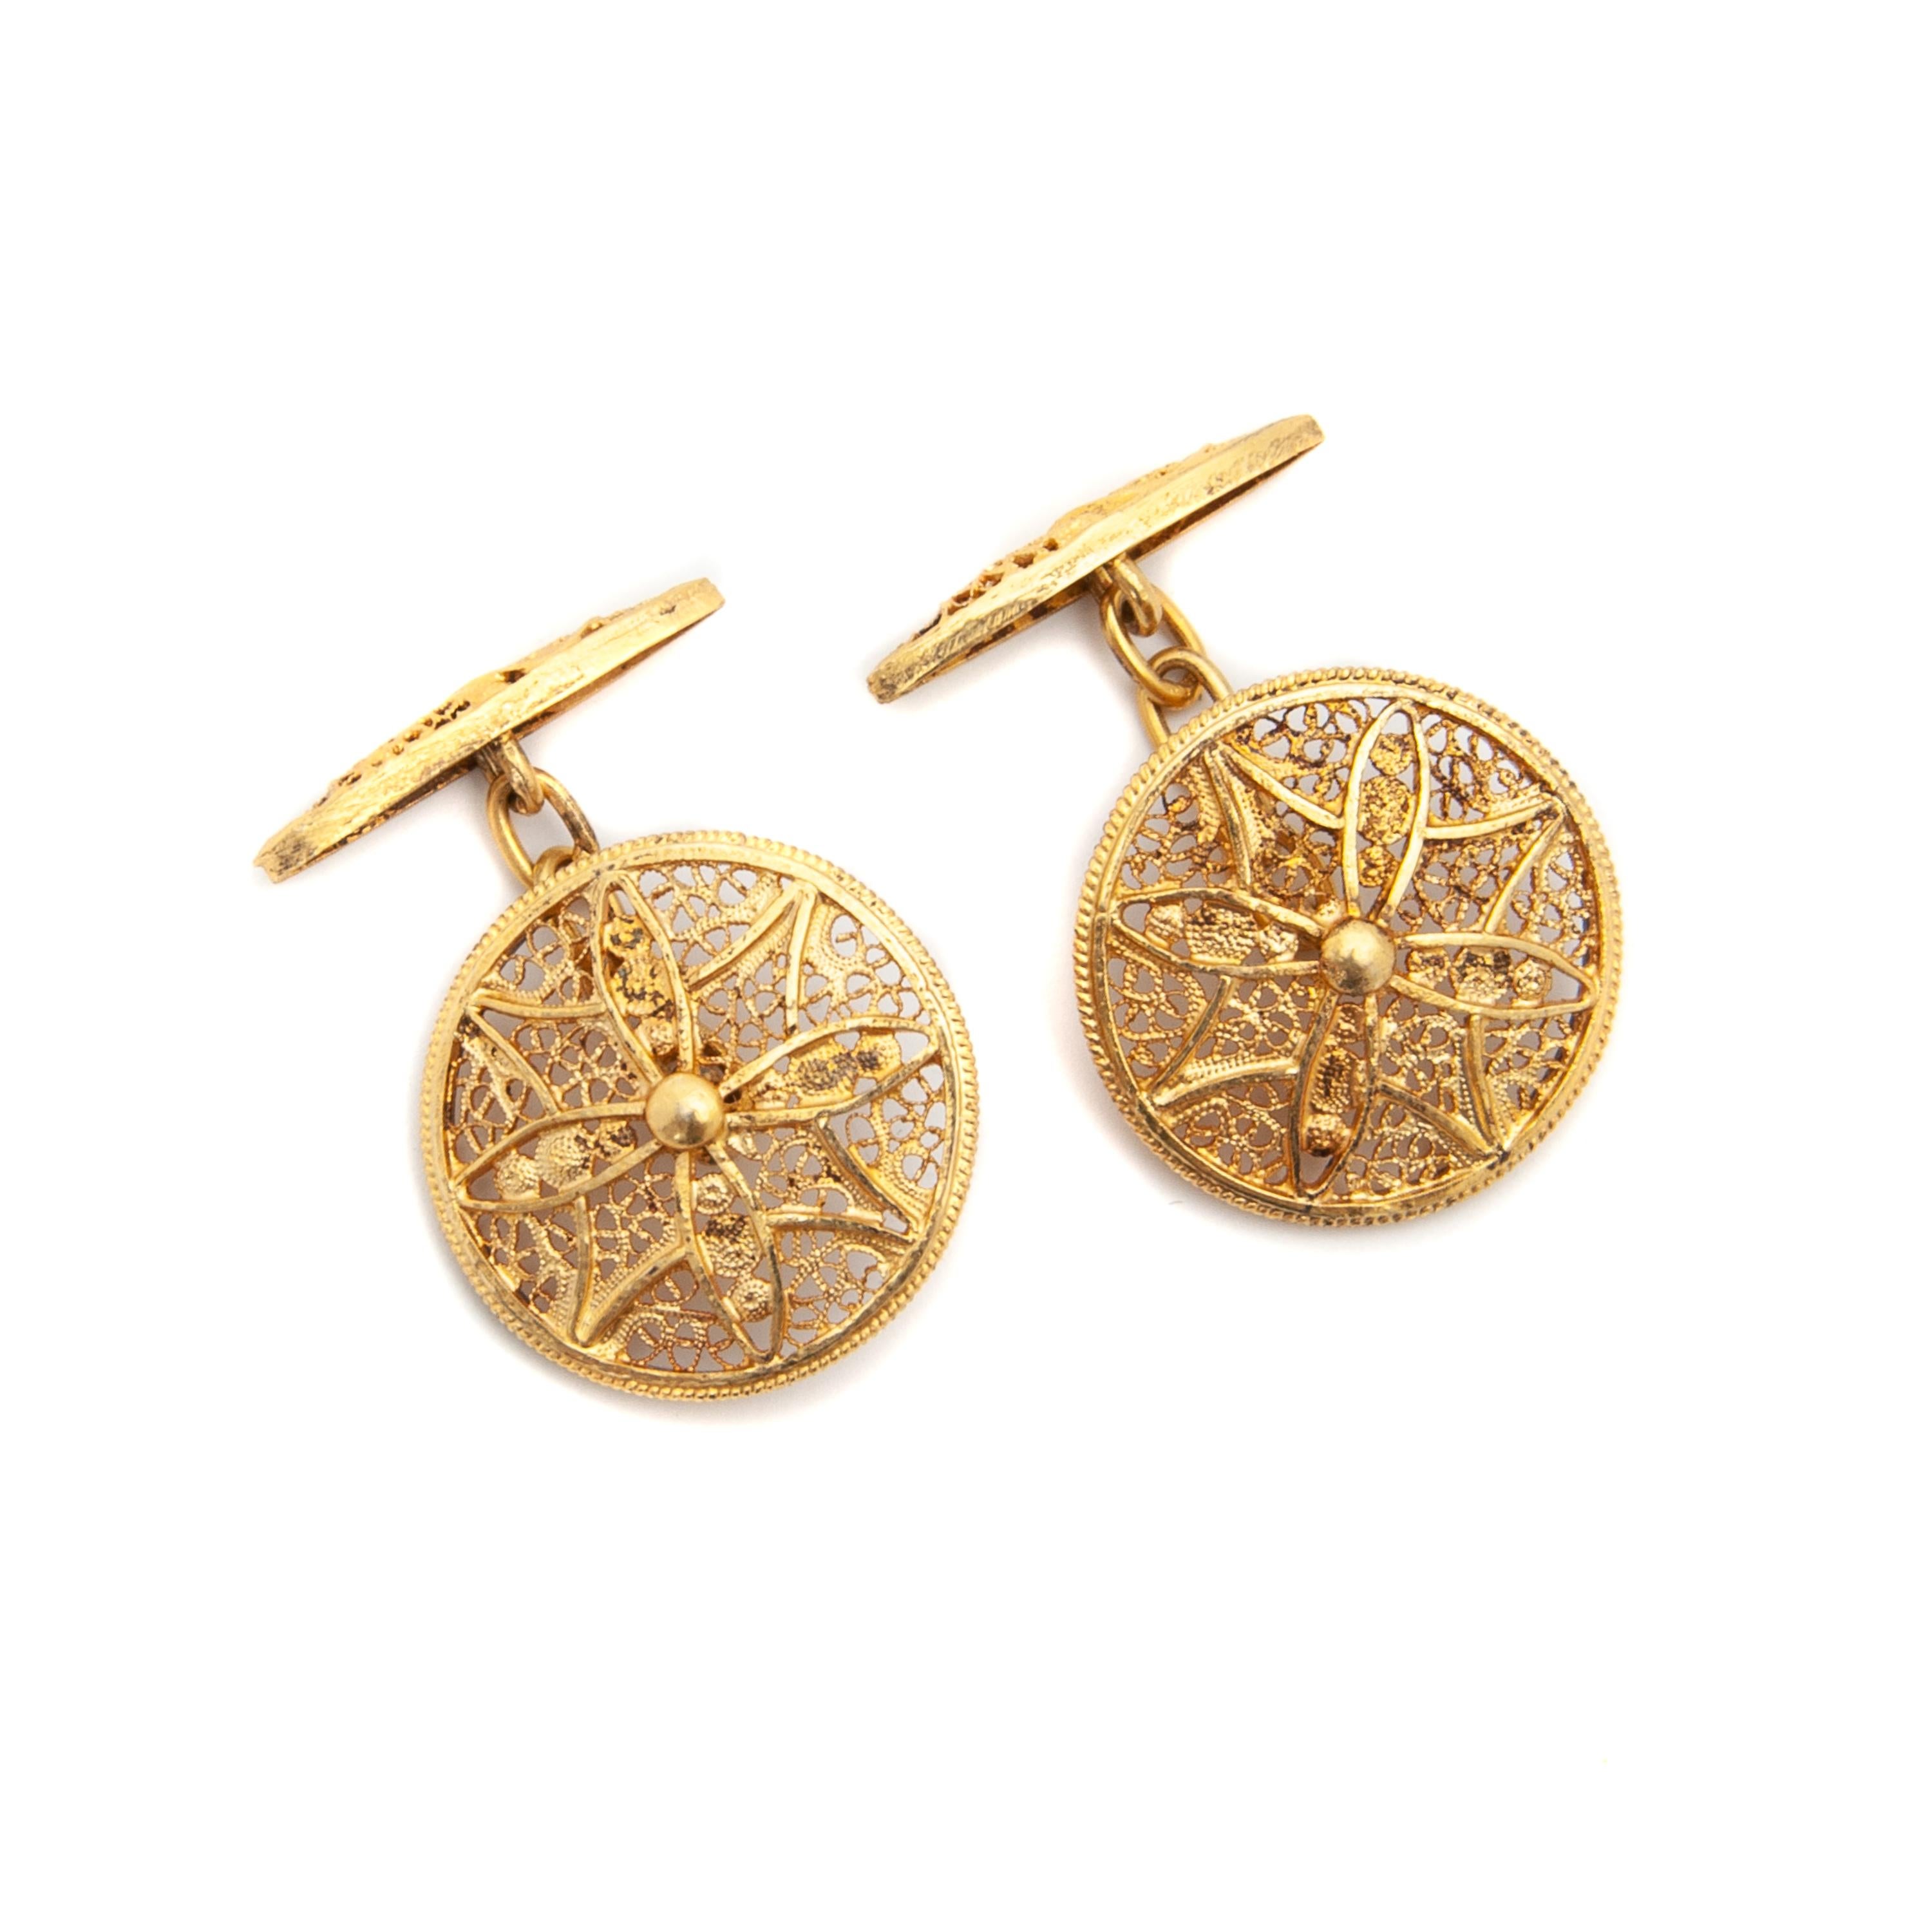 These gorgeous antique 18 karat gold double sided filigree cufflinks are made around the 1900's. This lovely pair have a gold filigree openwork design. The pair has round button style tops with gold ring shanks that connect with chain links to slim